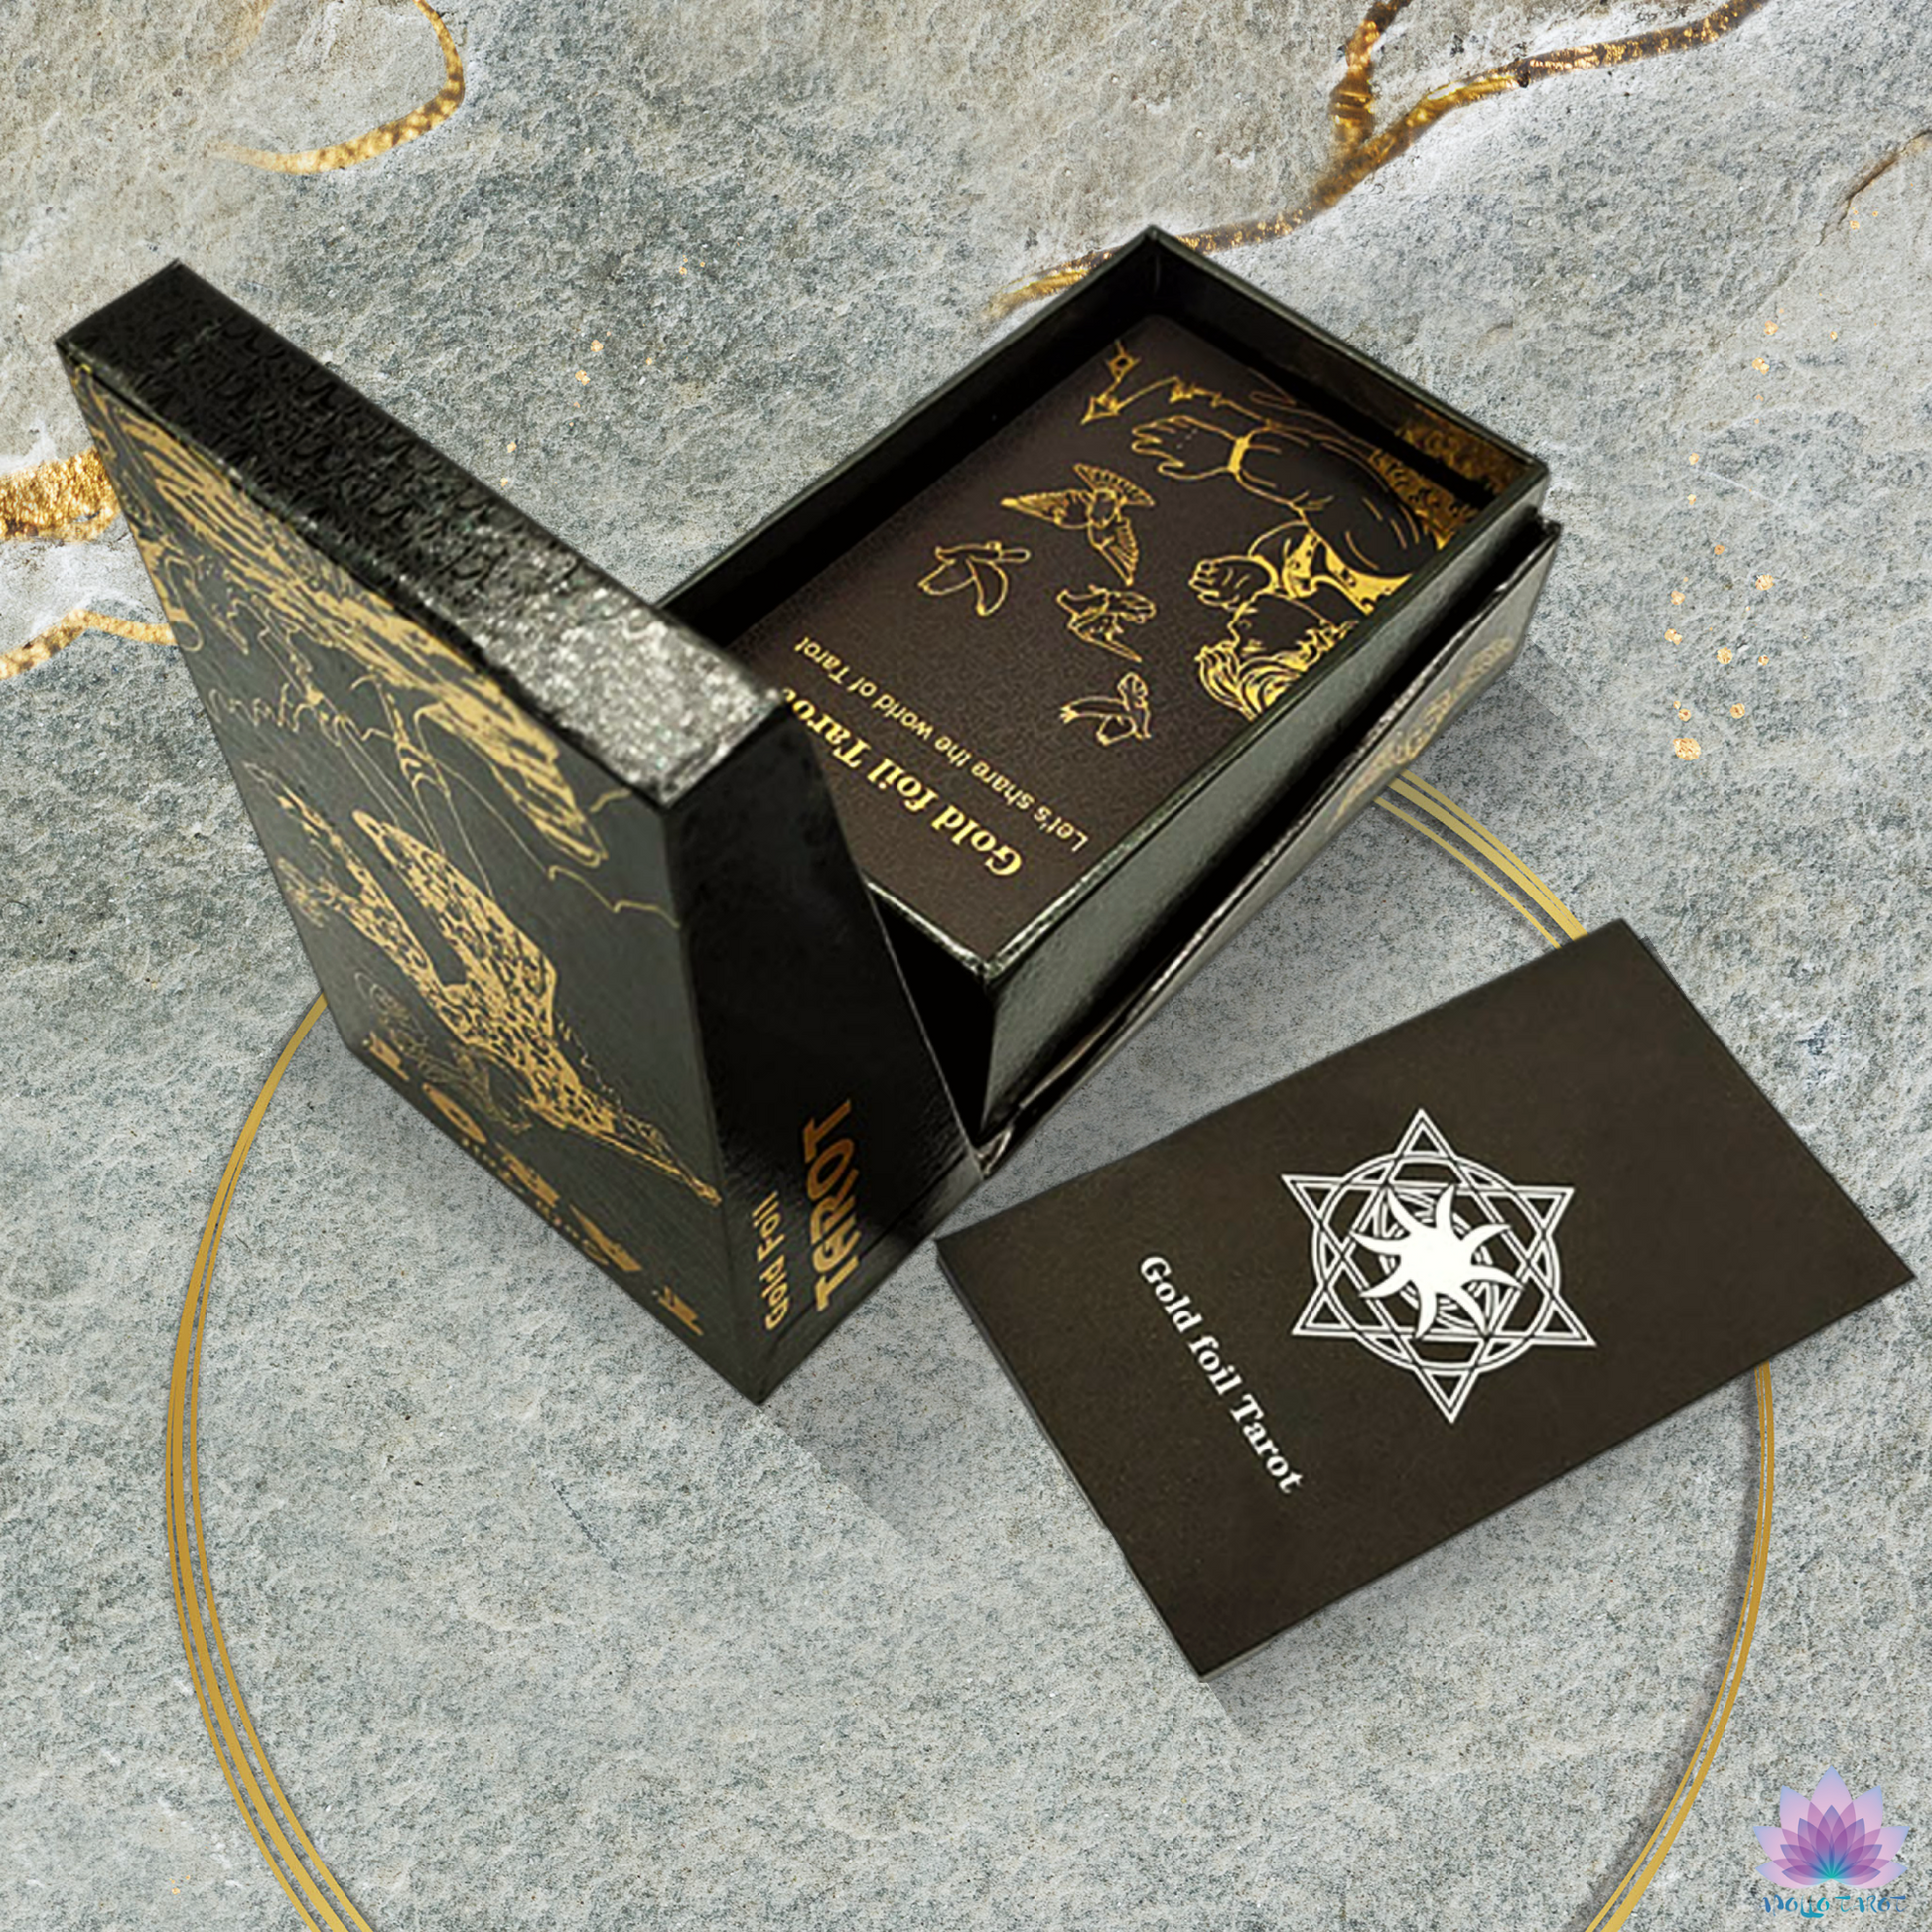 Black & Gold Foil Tarot Deck | Rider-Waite-Smith Remastered Cards For Beginner Tarot Readers | Premium Gift Box With English Guidebook